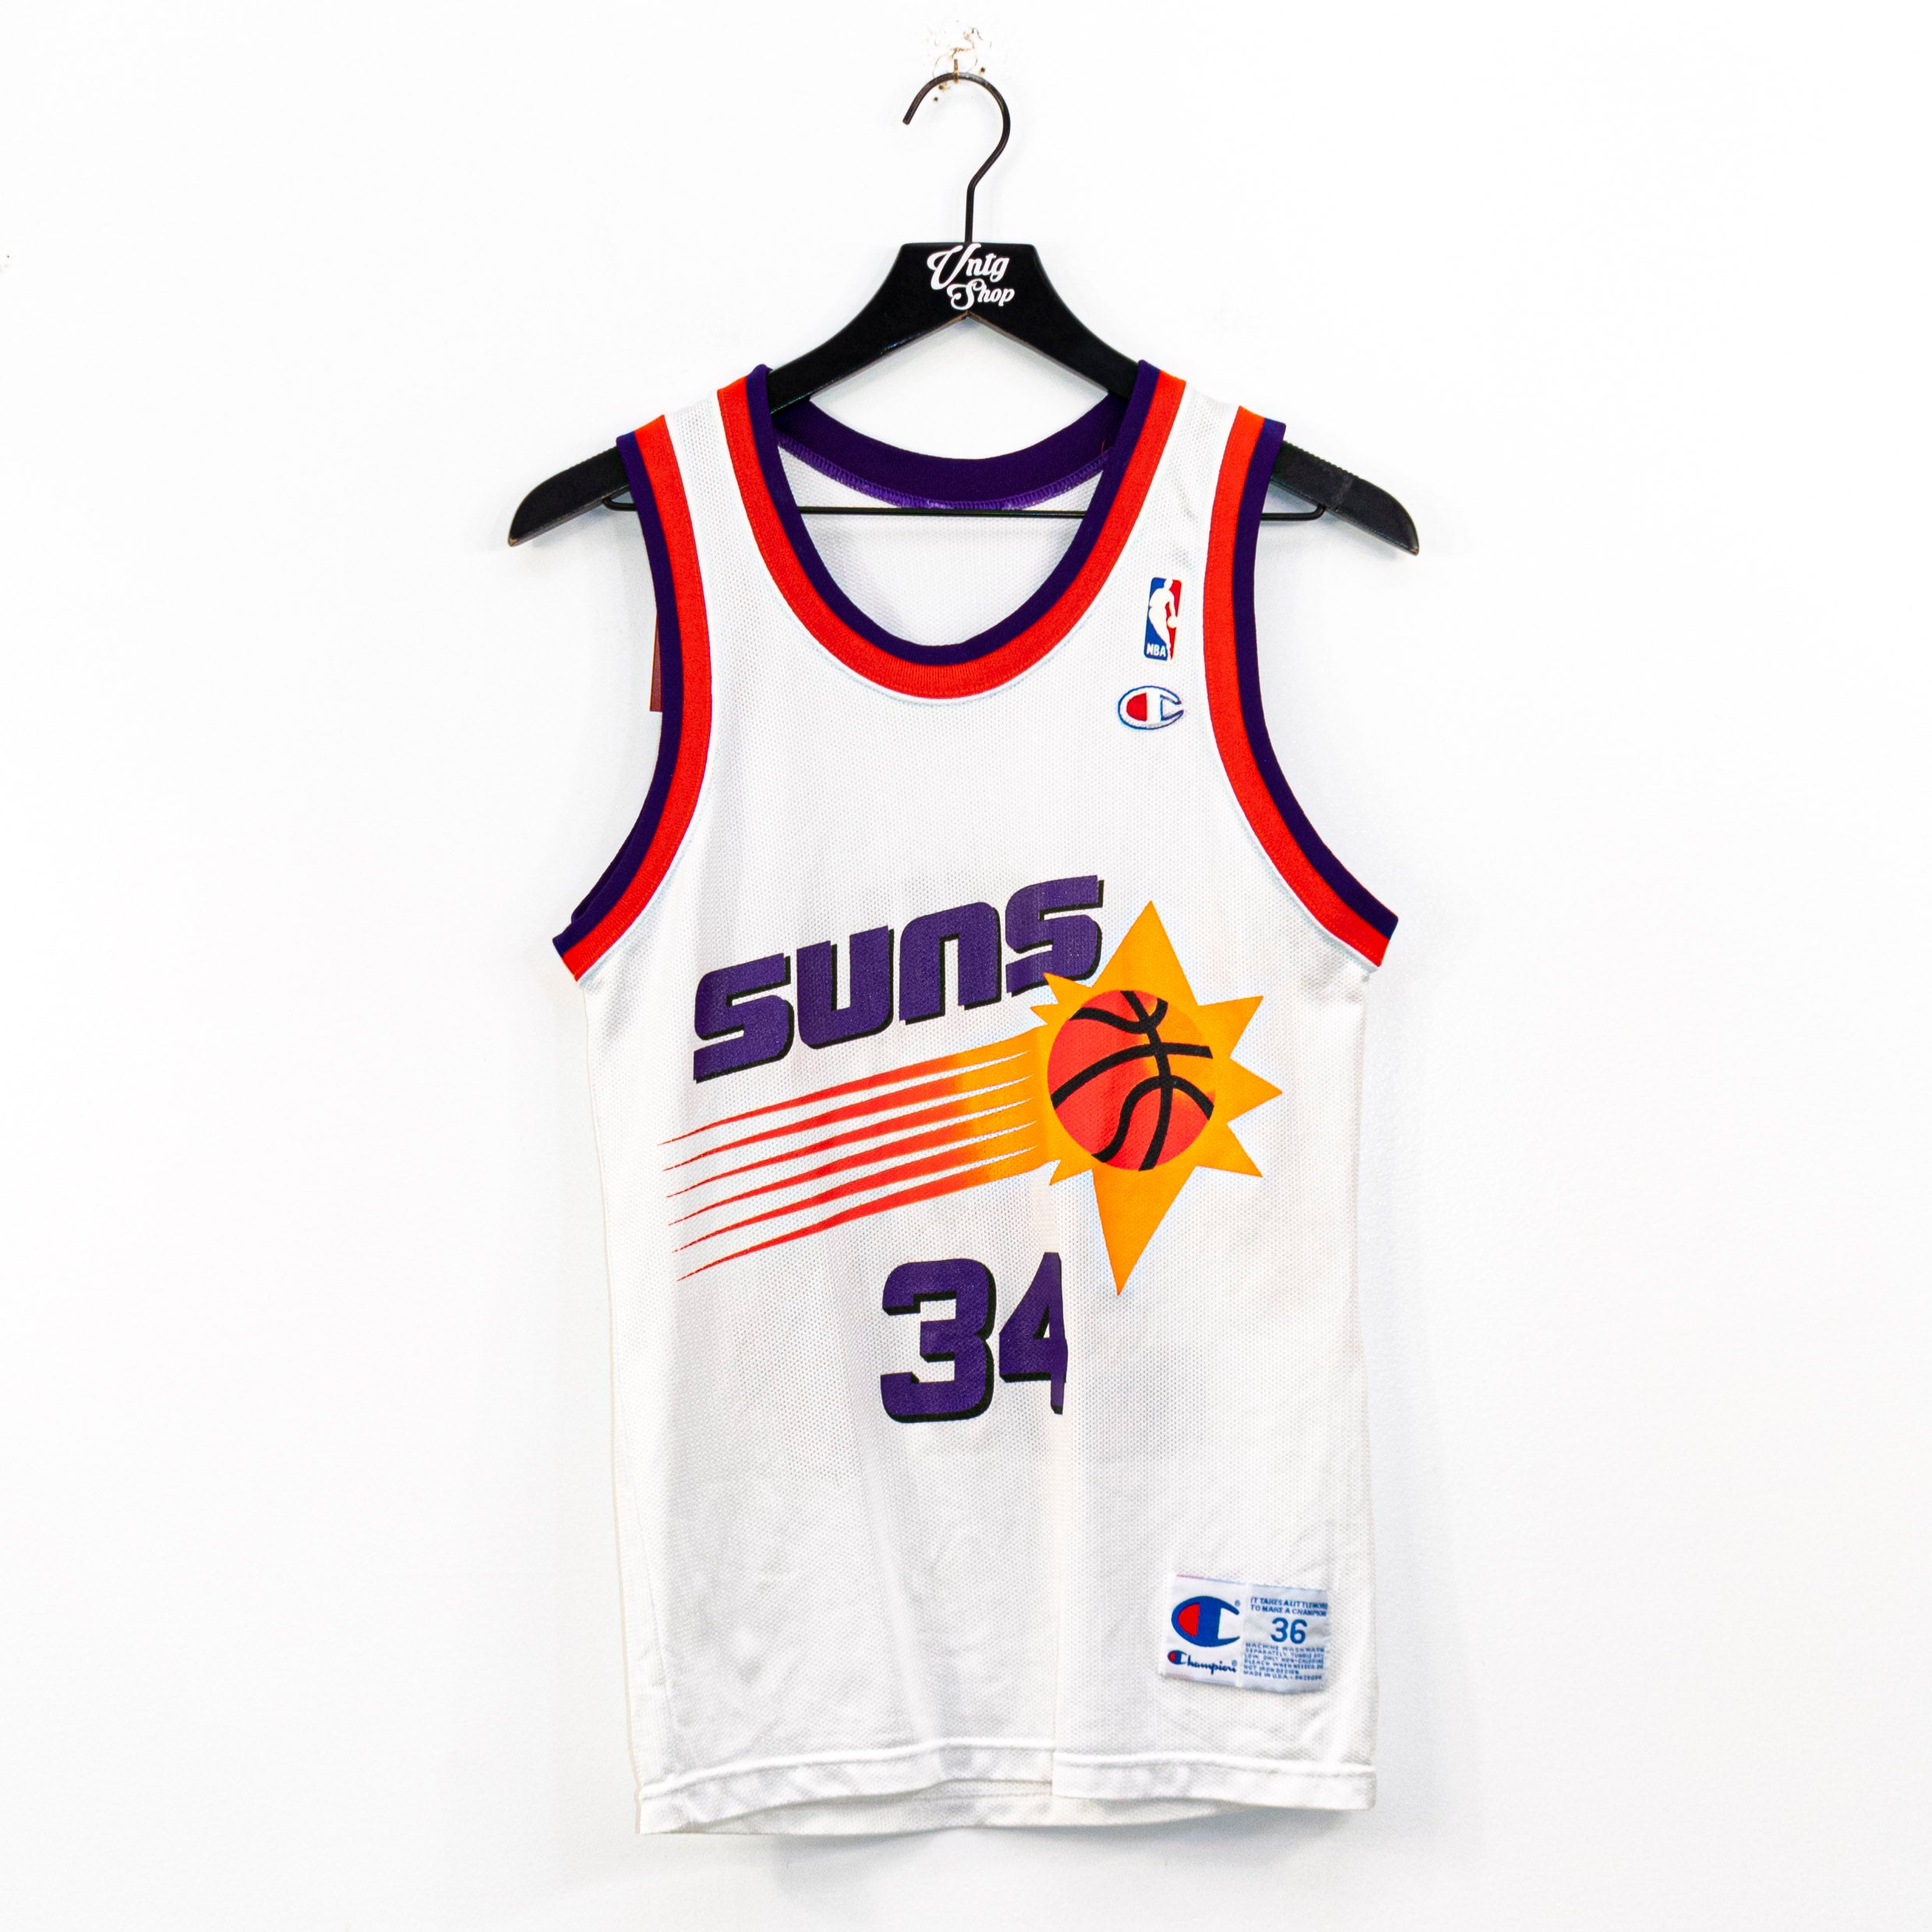 My Charles Barkley Phoenix Suns jersey from when I was a kid. I